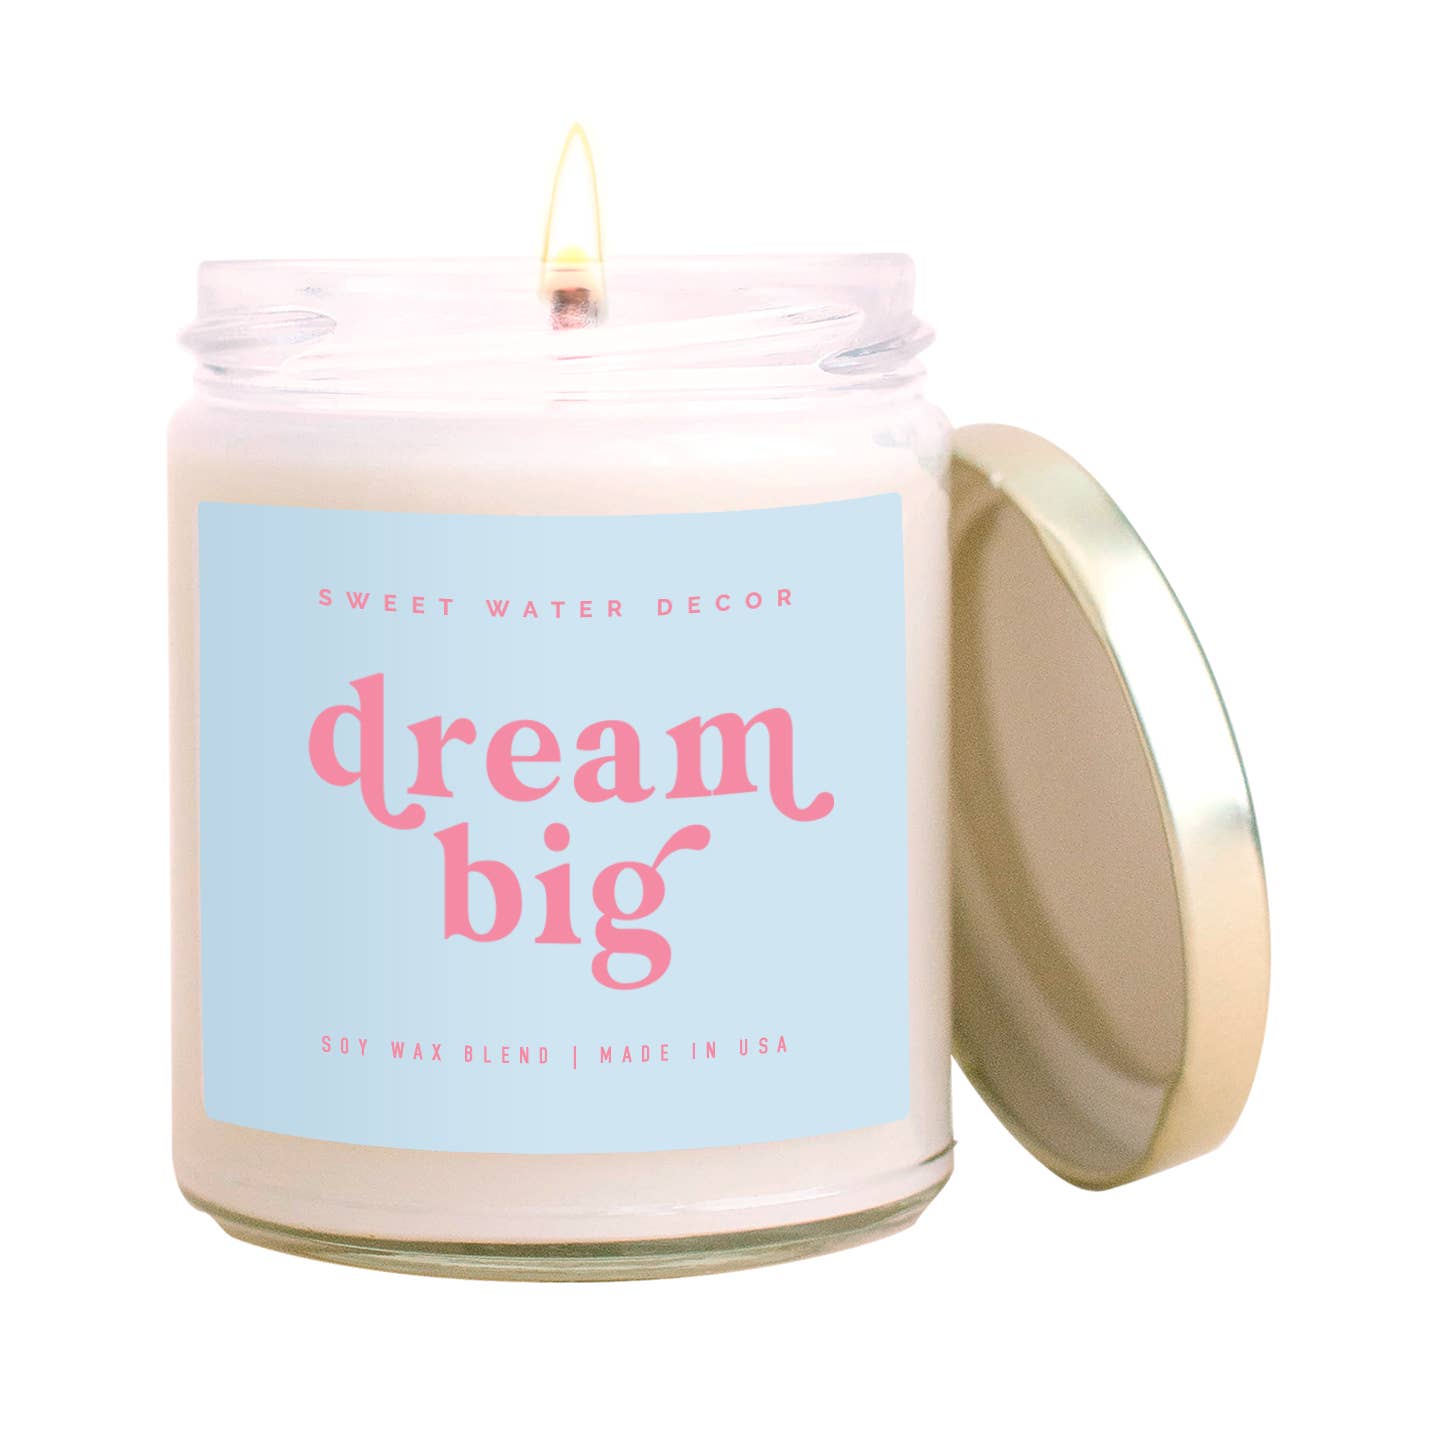 Sweet Water Decor - Dream Big 9 oz Soy Candle - Home Decor & Gifts